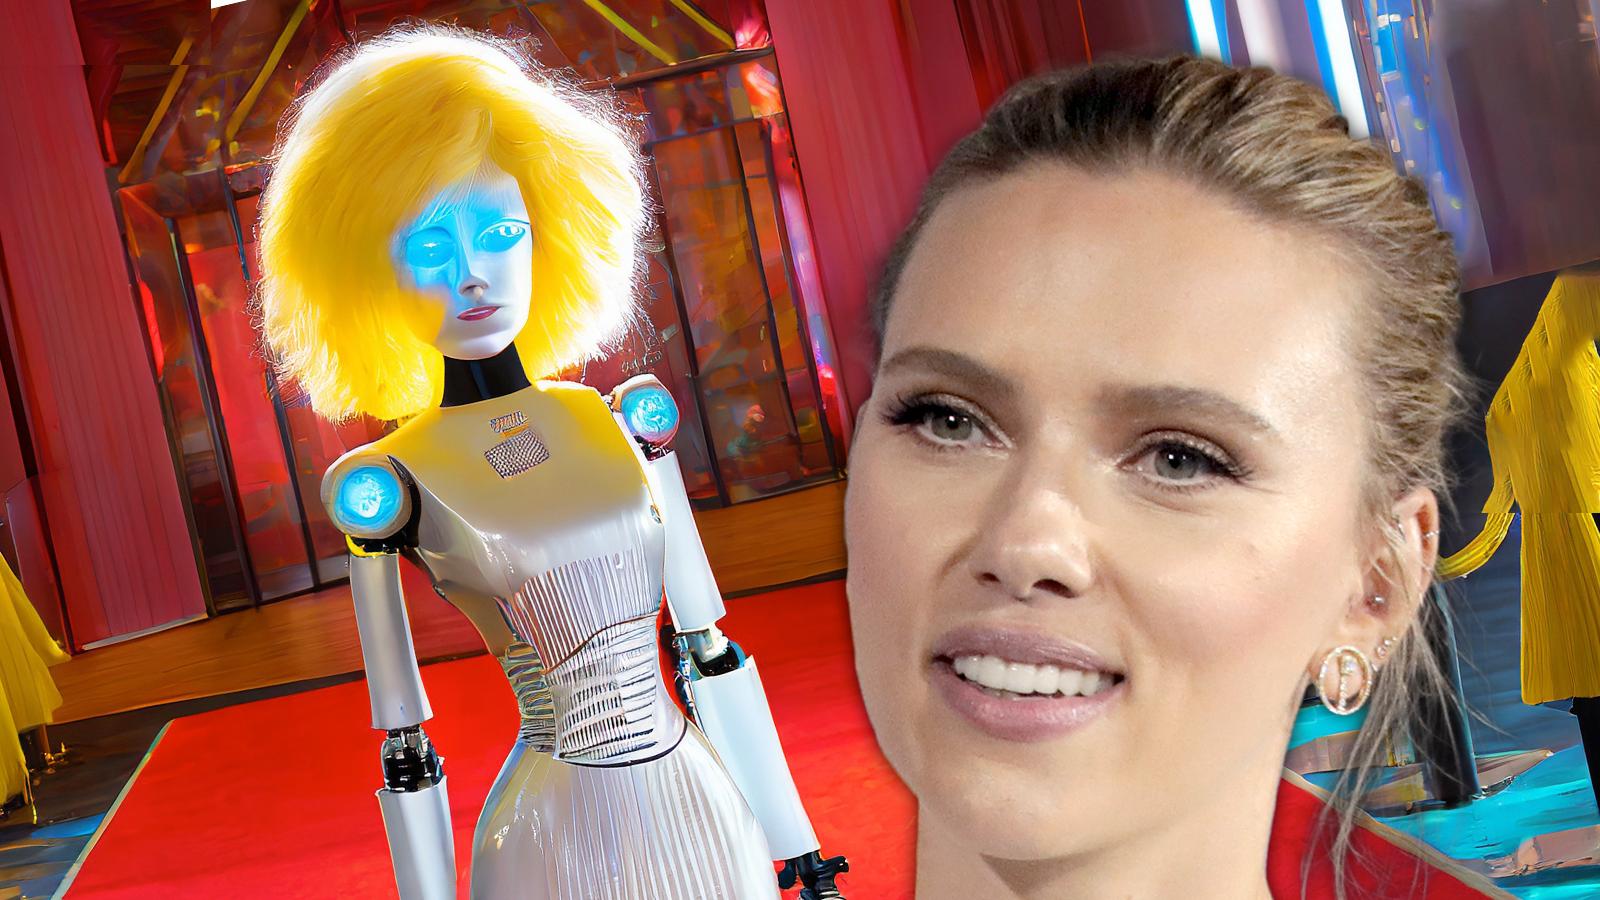 Scarlett Johasson with an AI generated image behind her of a robot on the red carpet in a blonde wig